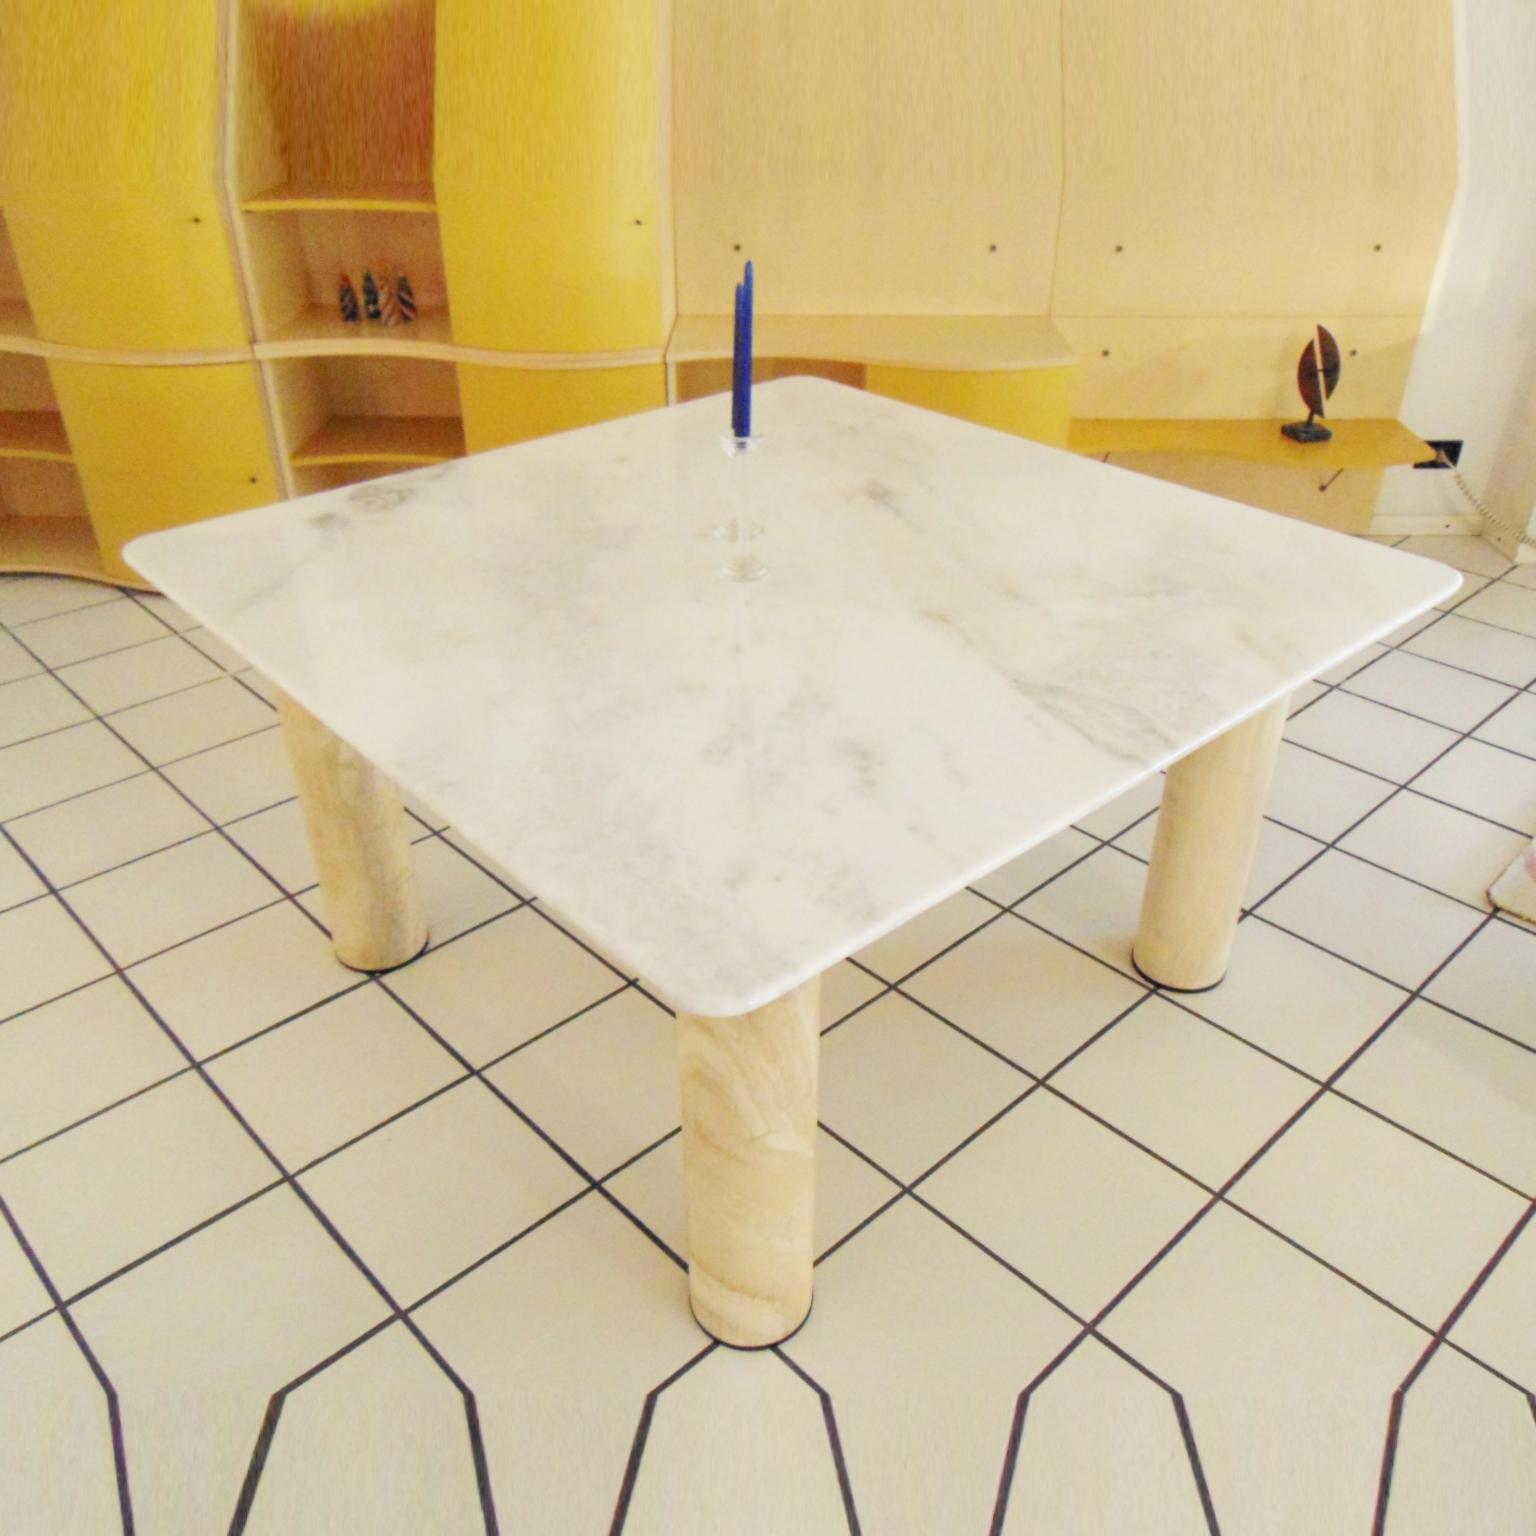 Polished 1981 Large Square Dining Table White Marble and Travertine, Sormani, Italy